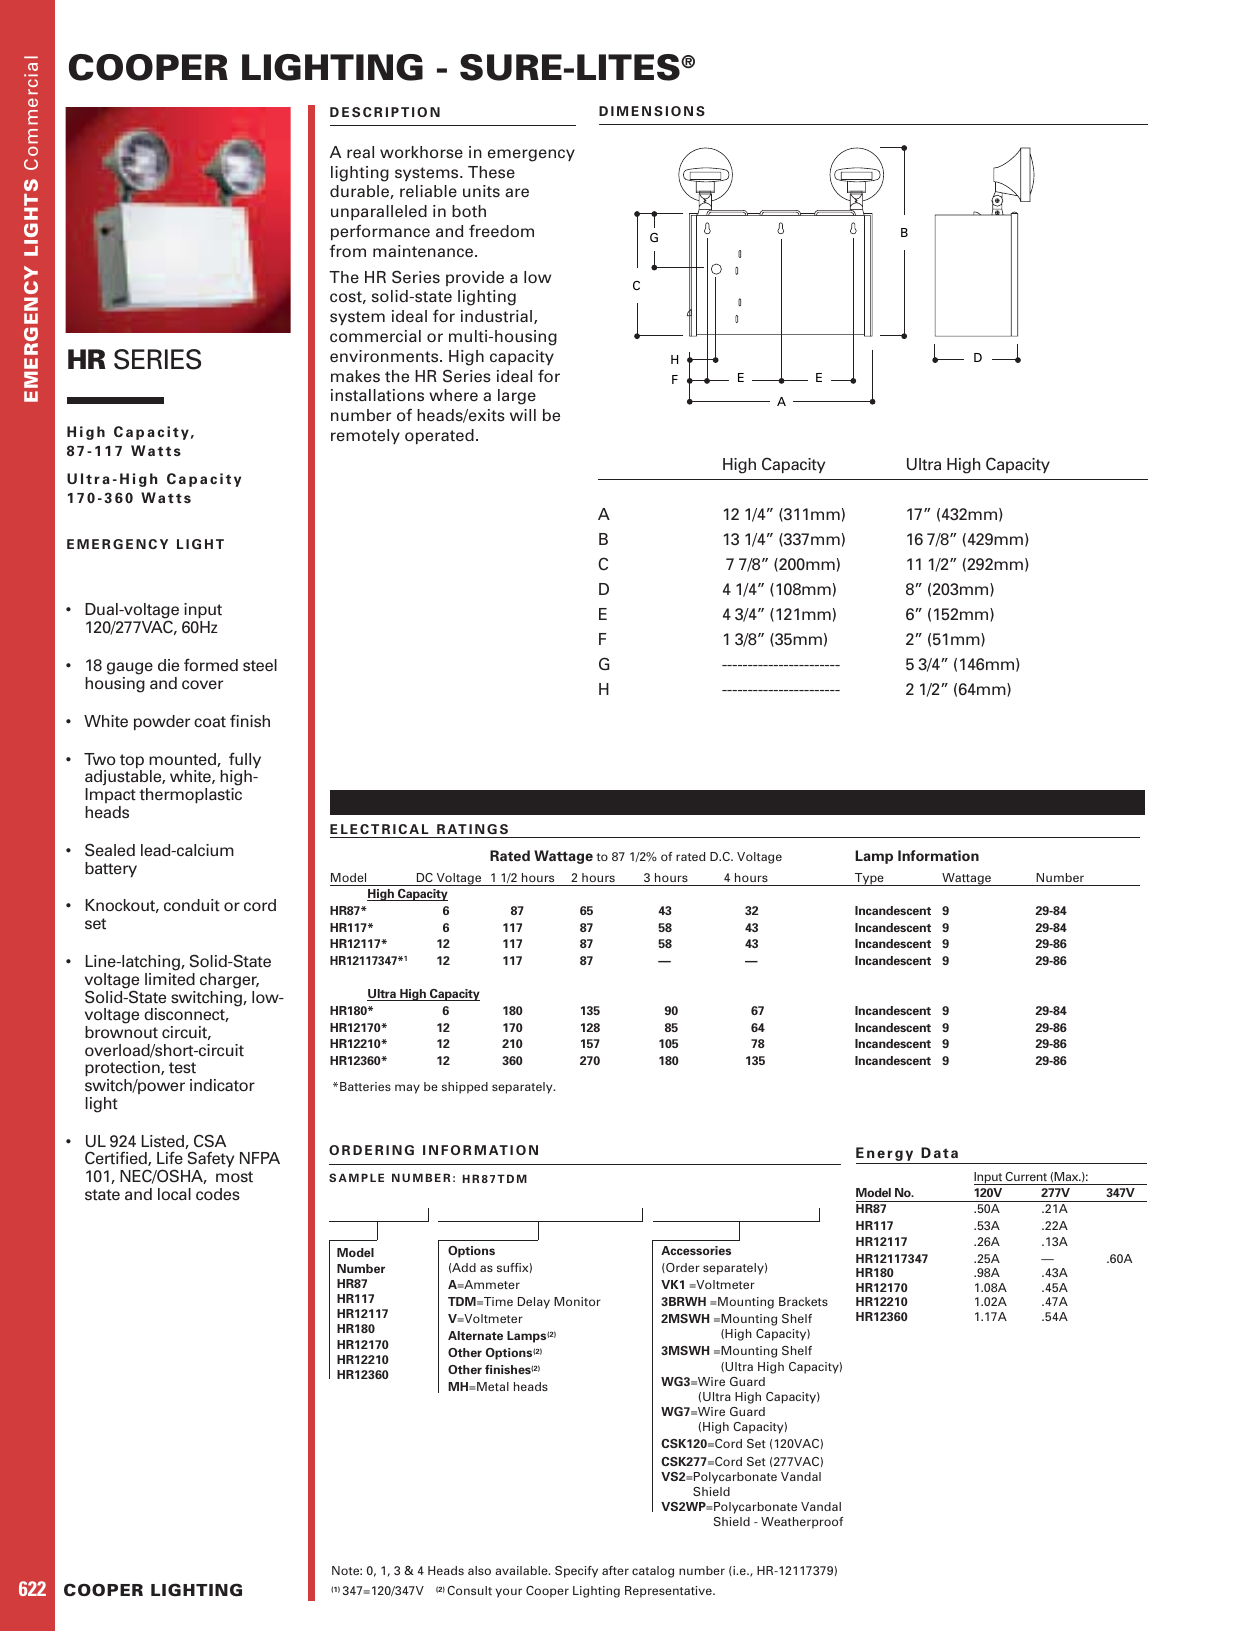 Page 1 of 1 - Cooper-Lighting Cooper-Lighting-Sure-Lites-Hr117-Users-Manual-  Cooper-lighting-sure-lites-hr117-users-manual